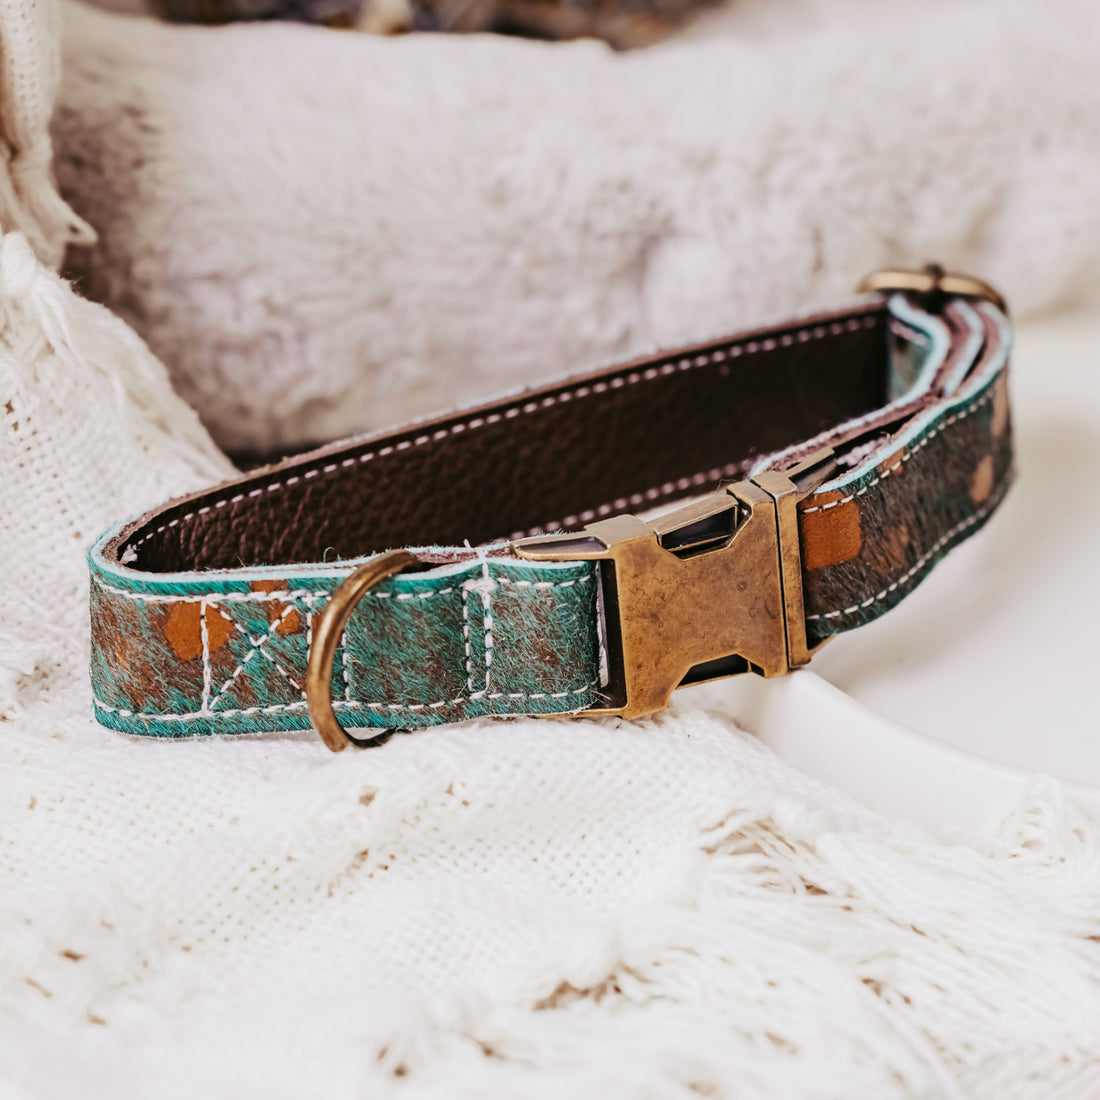 leather dog collar made by dacus doodles